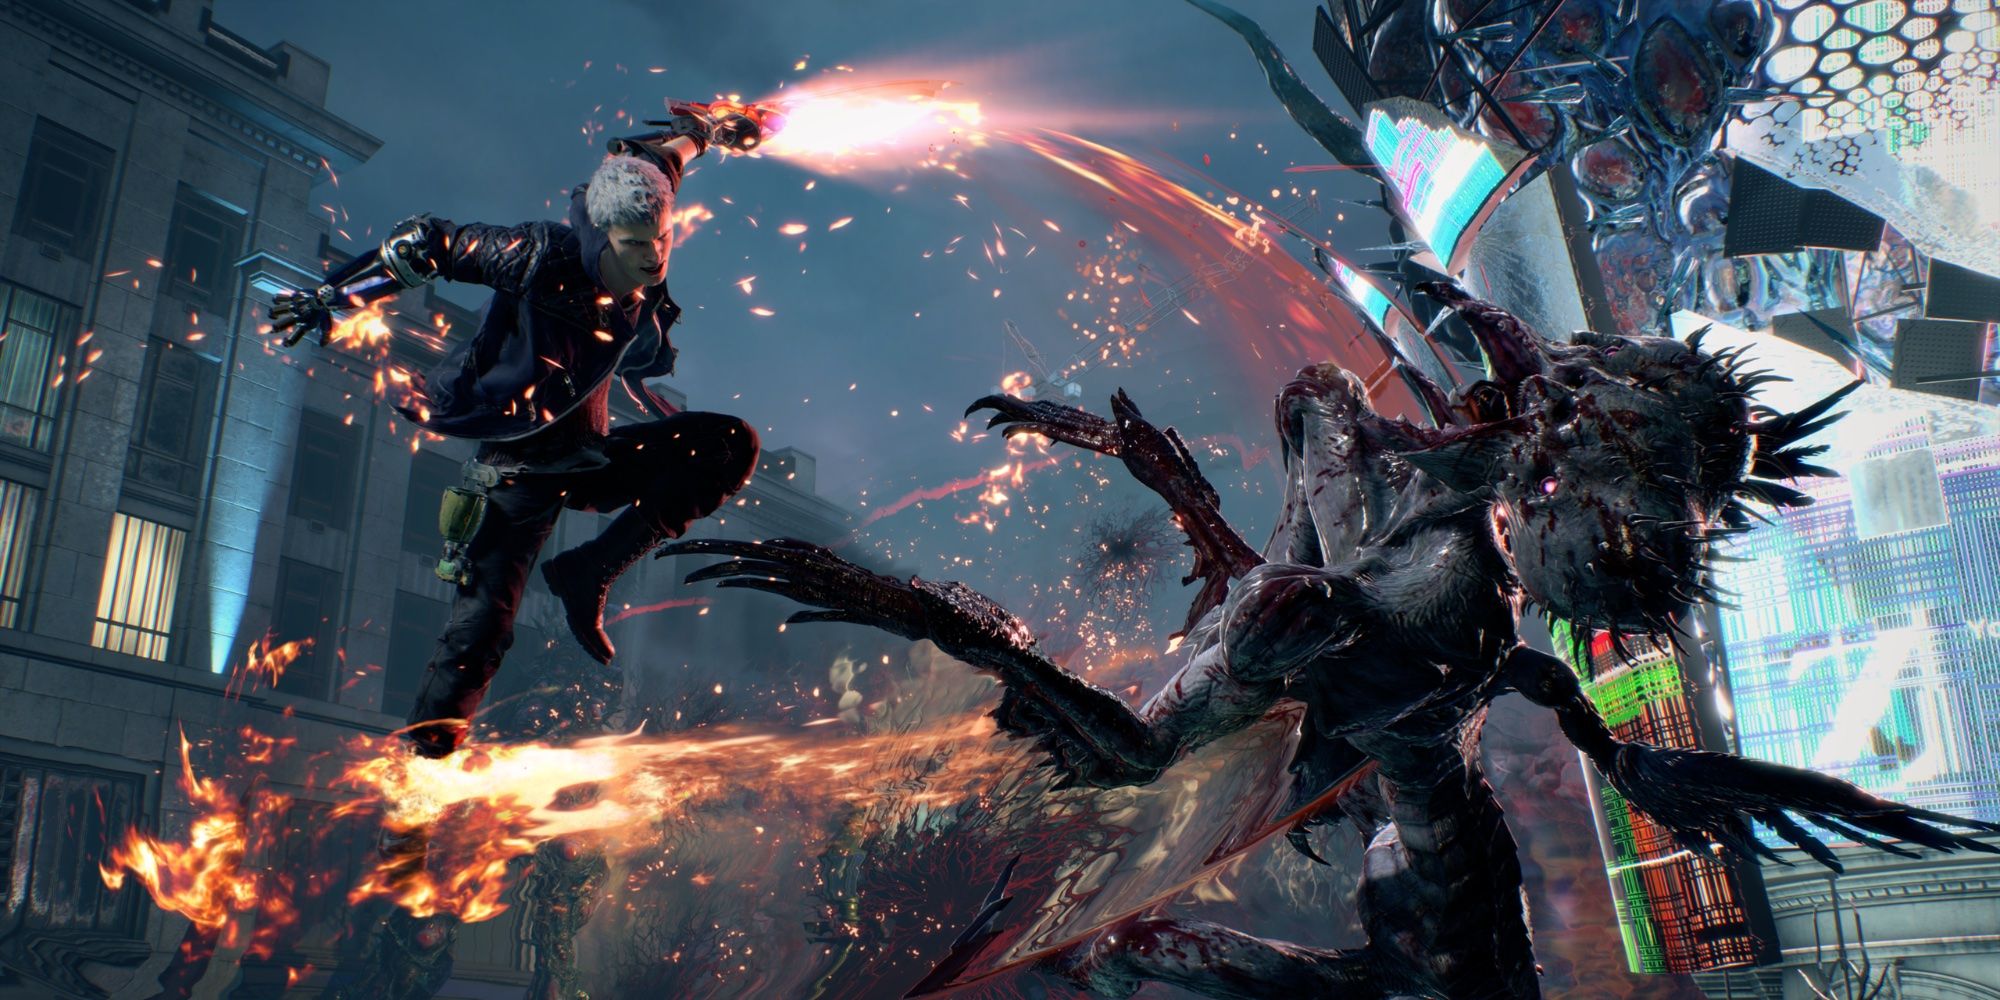 Nero from Devil May Cry 5 jumps in for the kill.